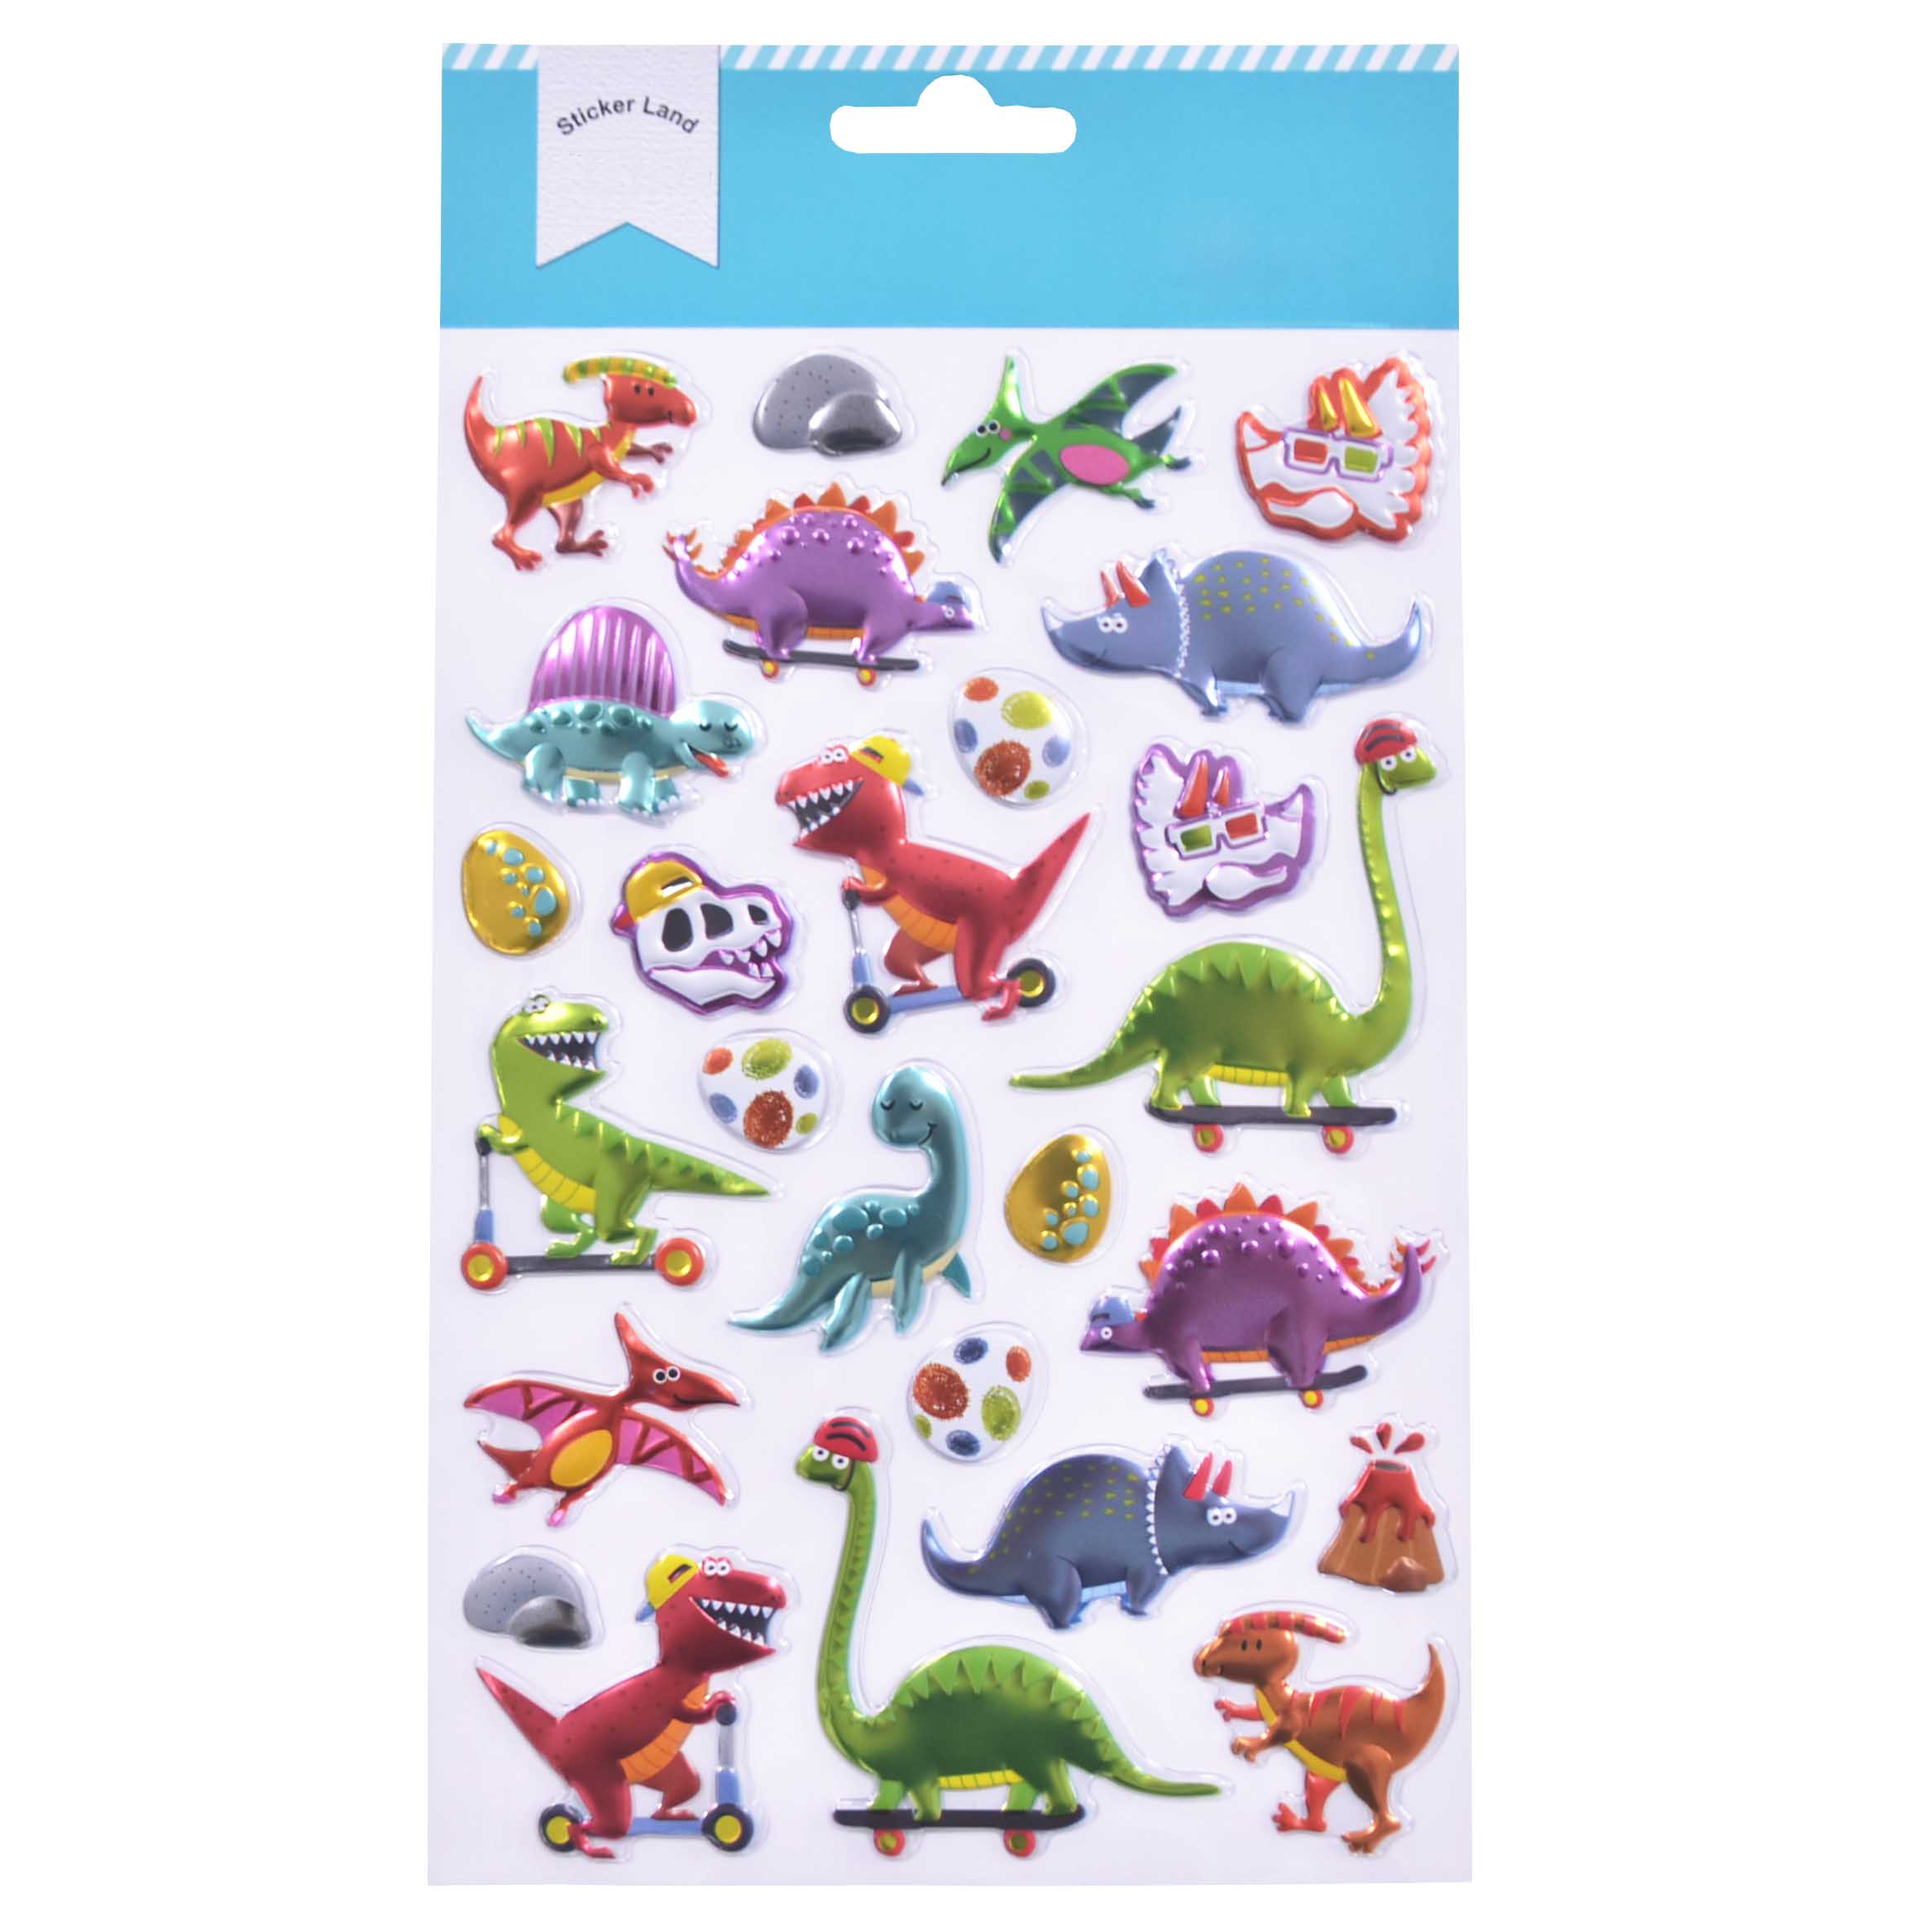 Metallic Balloon Stickers With Funny Dinosaurs Designs For Stationery Decor